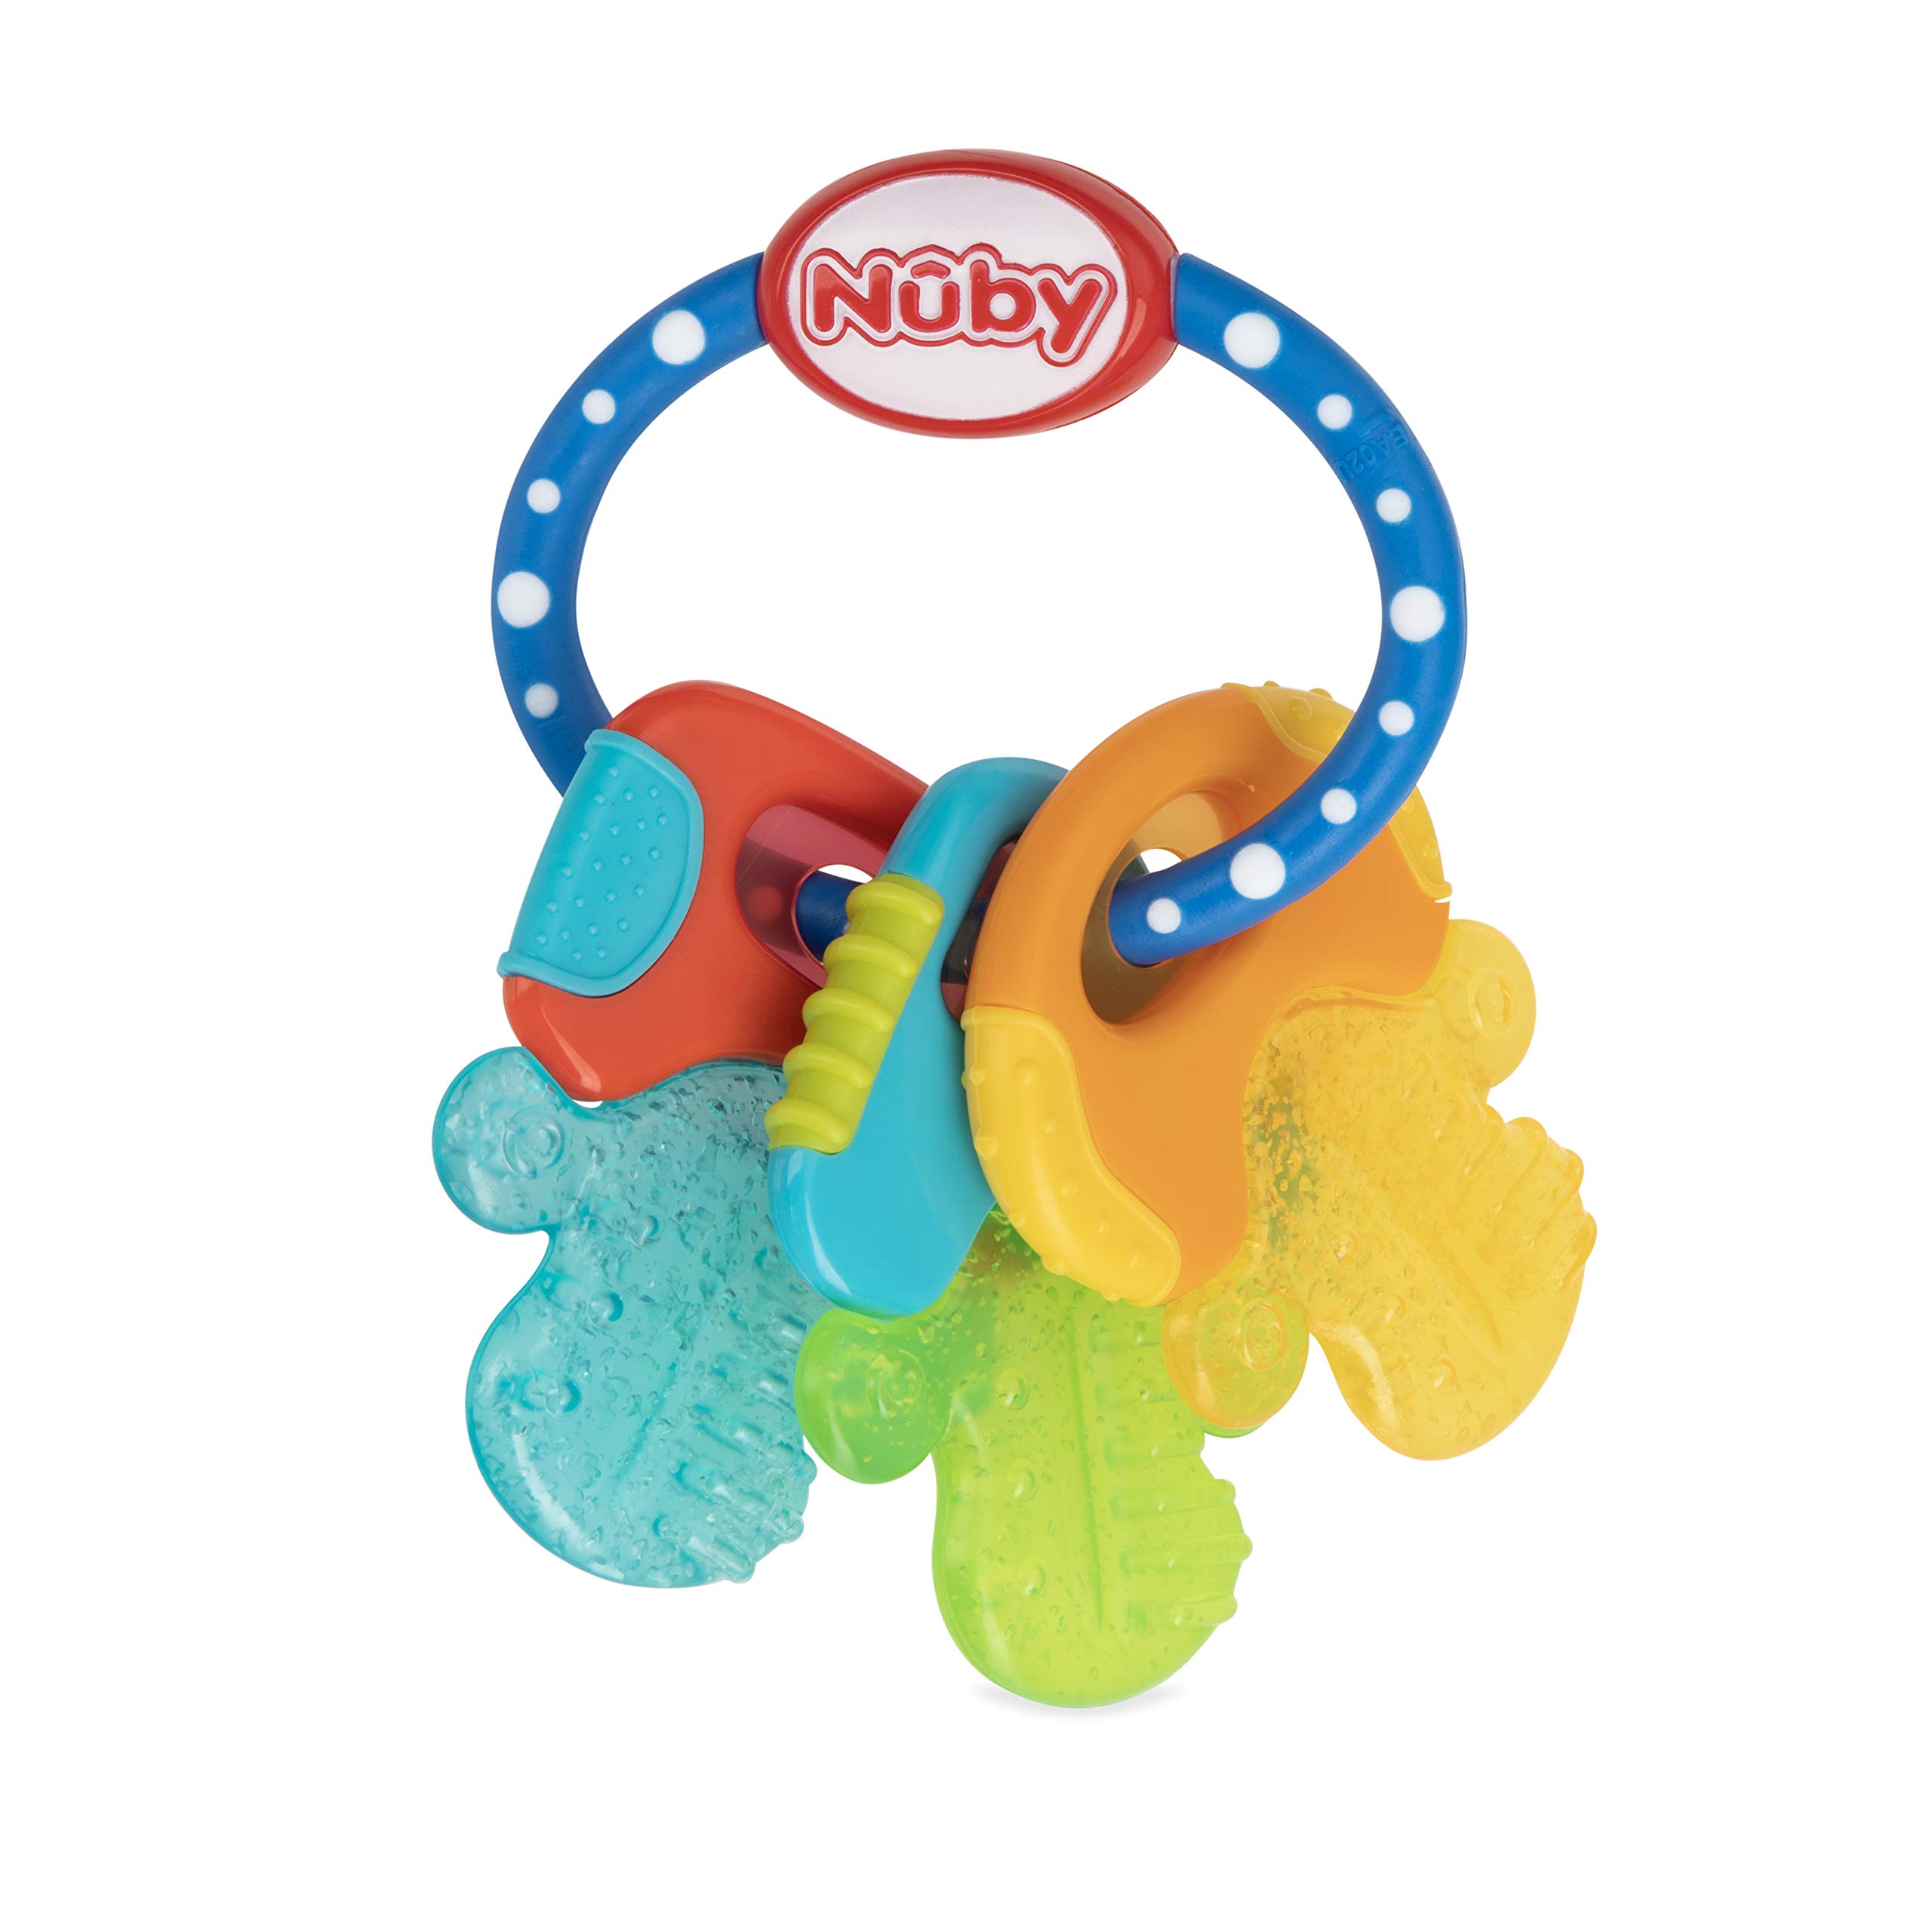 Nuby IcyBite Textured and Soothing Teether for Baby, Multicolor Keys - image 3 of 5